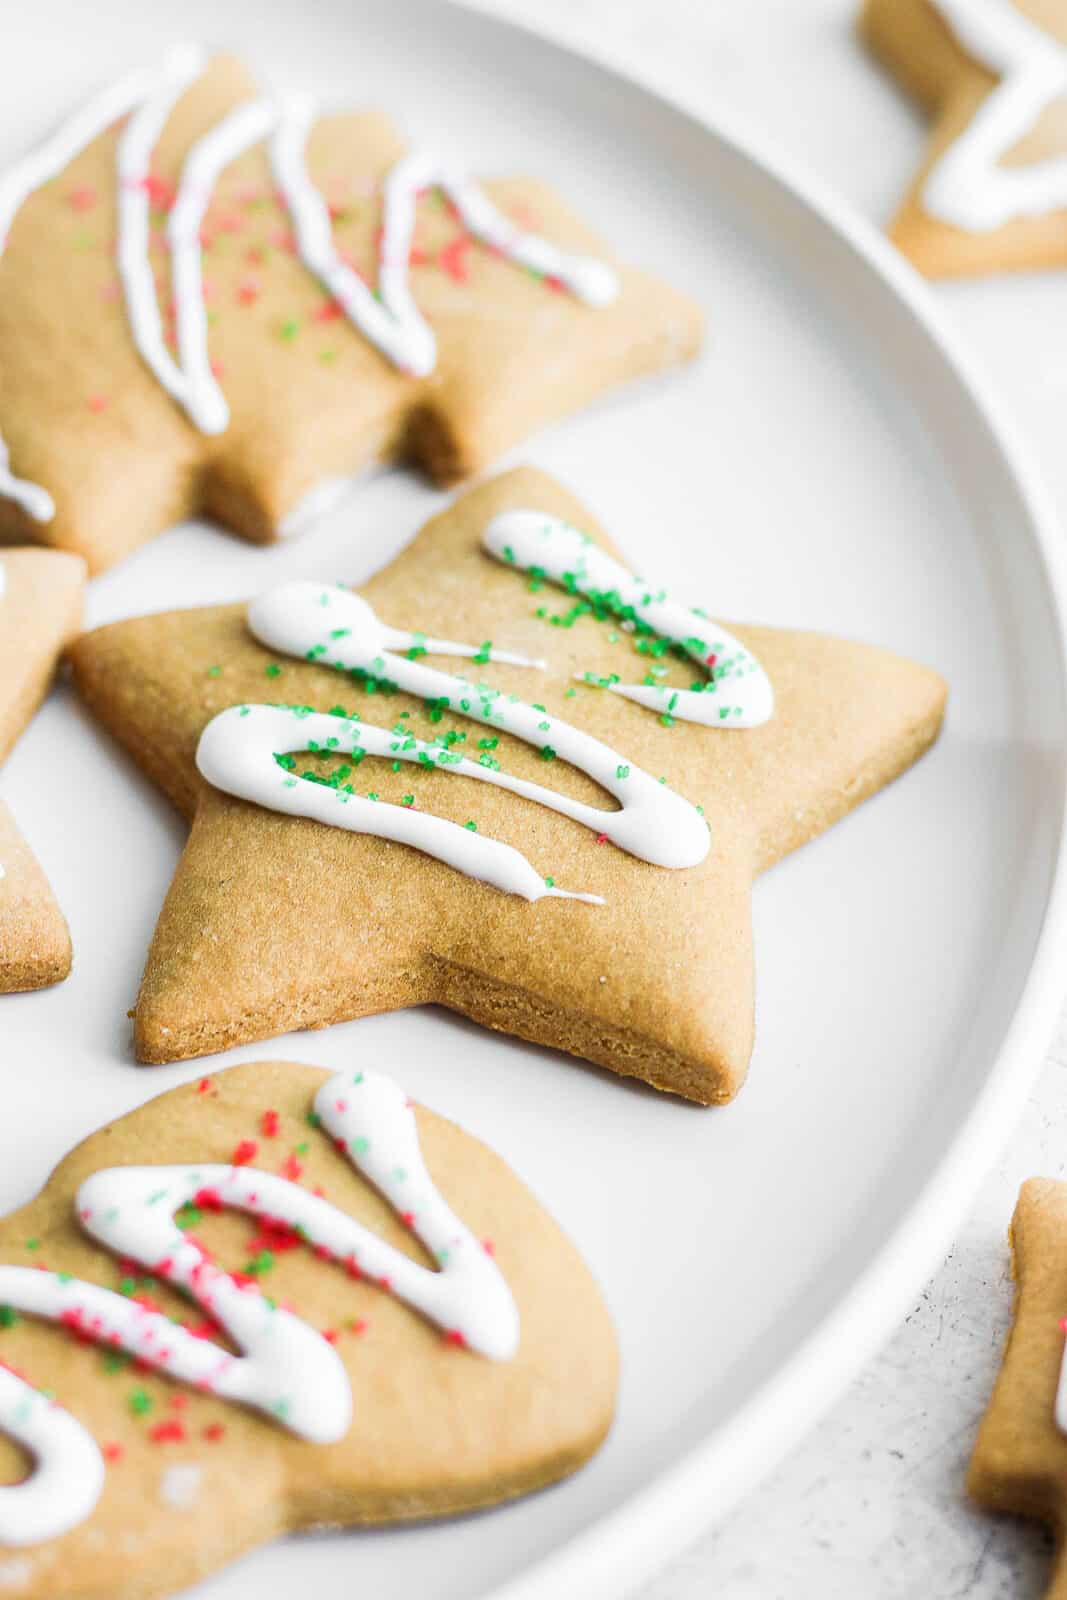 Decorated cut-out cookies on a plate.